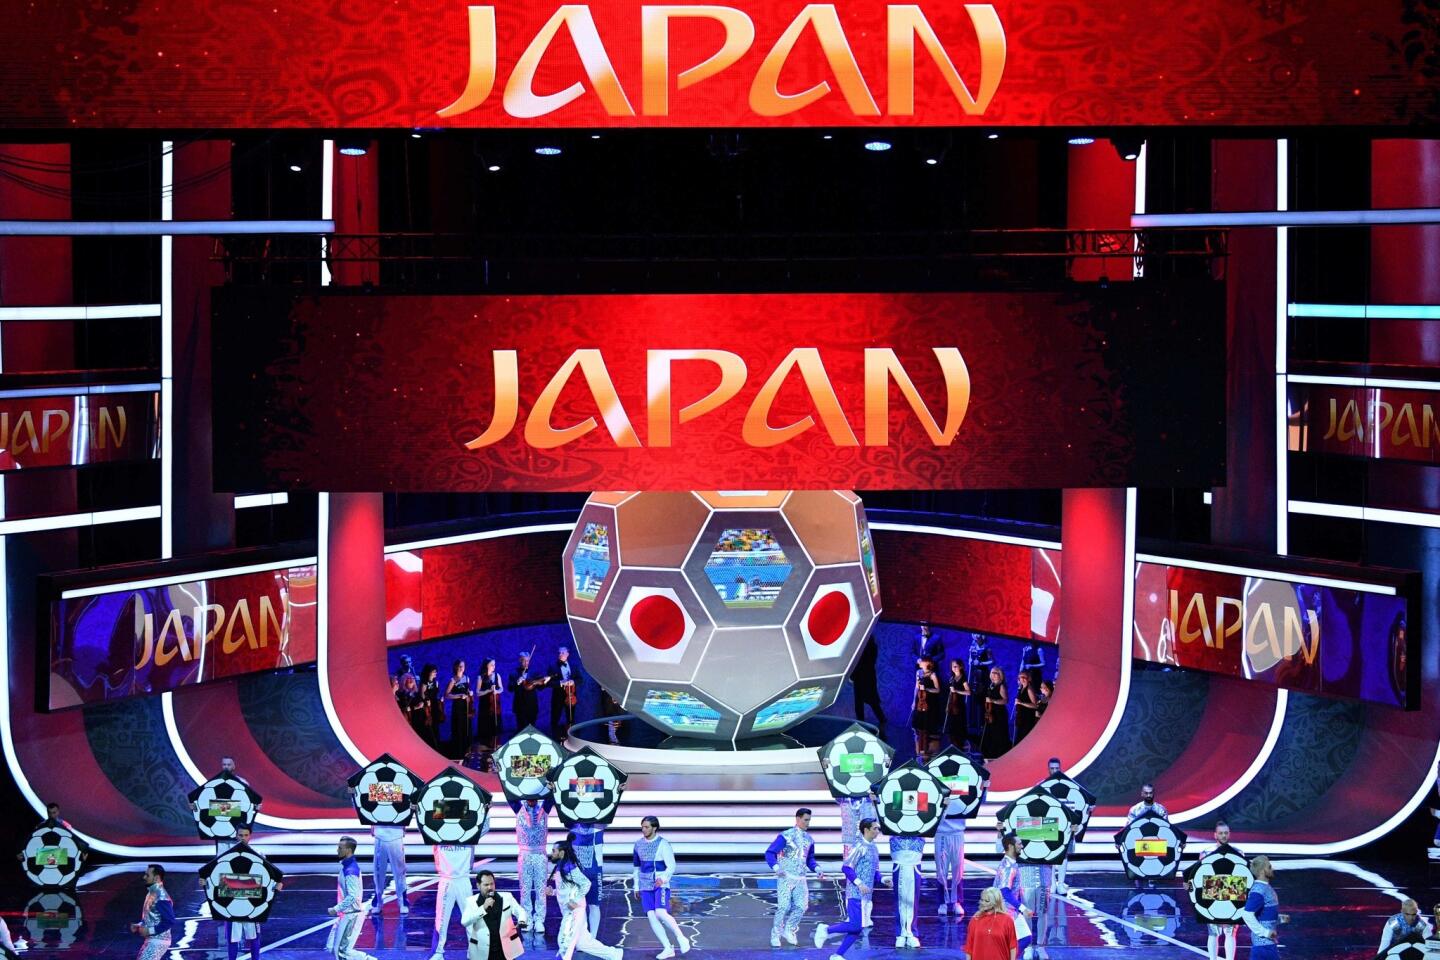 Artists perform on stage as "Japan" is displayed on screens during the Final Draw for the 2018 FIFA World Cup football tournament at the State Kremlin Palace in Moscow on December 1, 2017. The 2018 FIFA World Cup will be held from June 14 and July 15, 2018, in 11 Russian cities. / AFP PHOTO / Mladen ANTONOVMLADEN ANTONOV/AFP/Getty Images ** OUTS - ELSENT, FPG, CM - OUTS * NM, PH, VA if sourced by CT, LA or MoD **